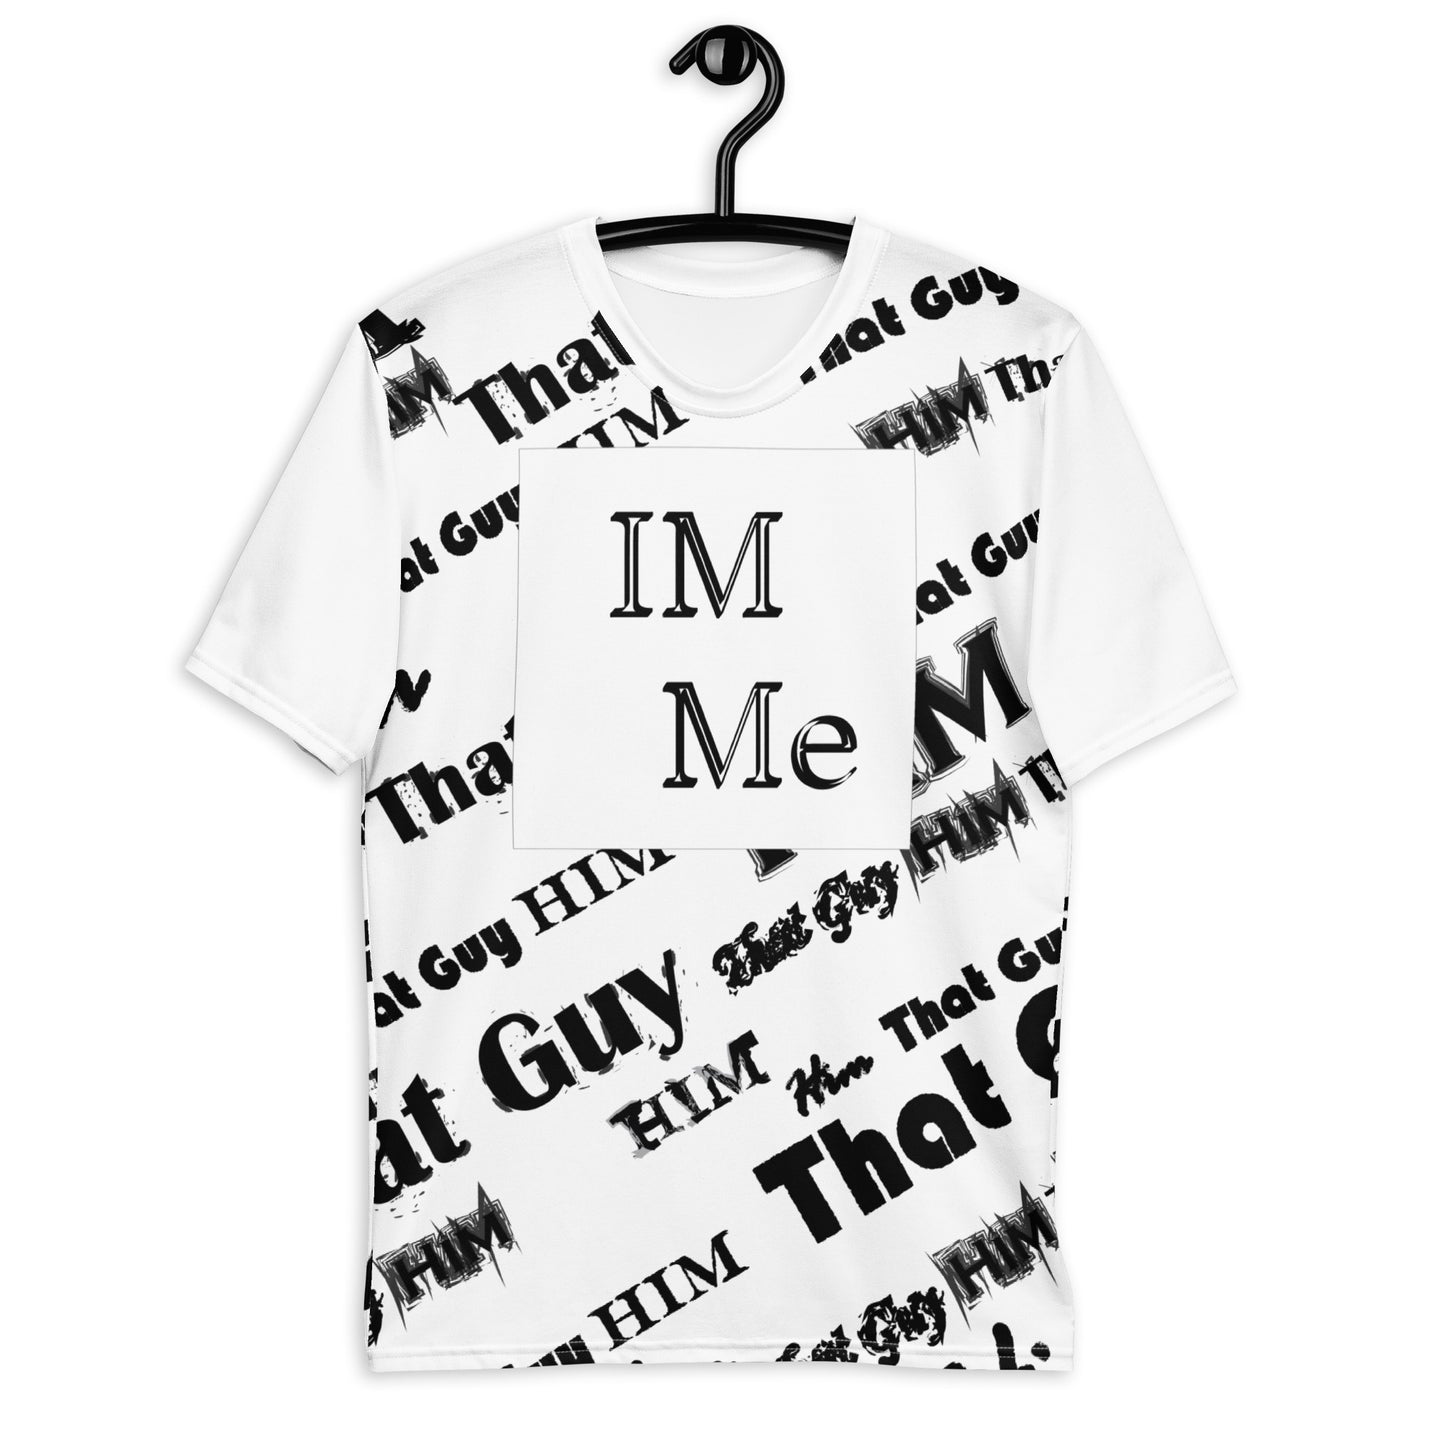 IM Me ( All-Over Print ) Most Wanted #2